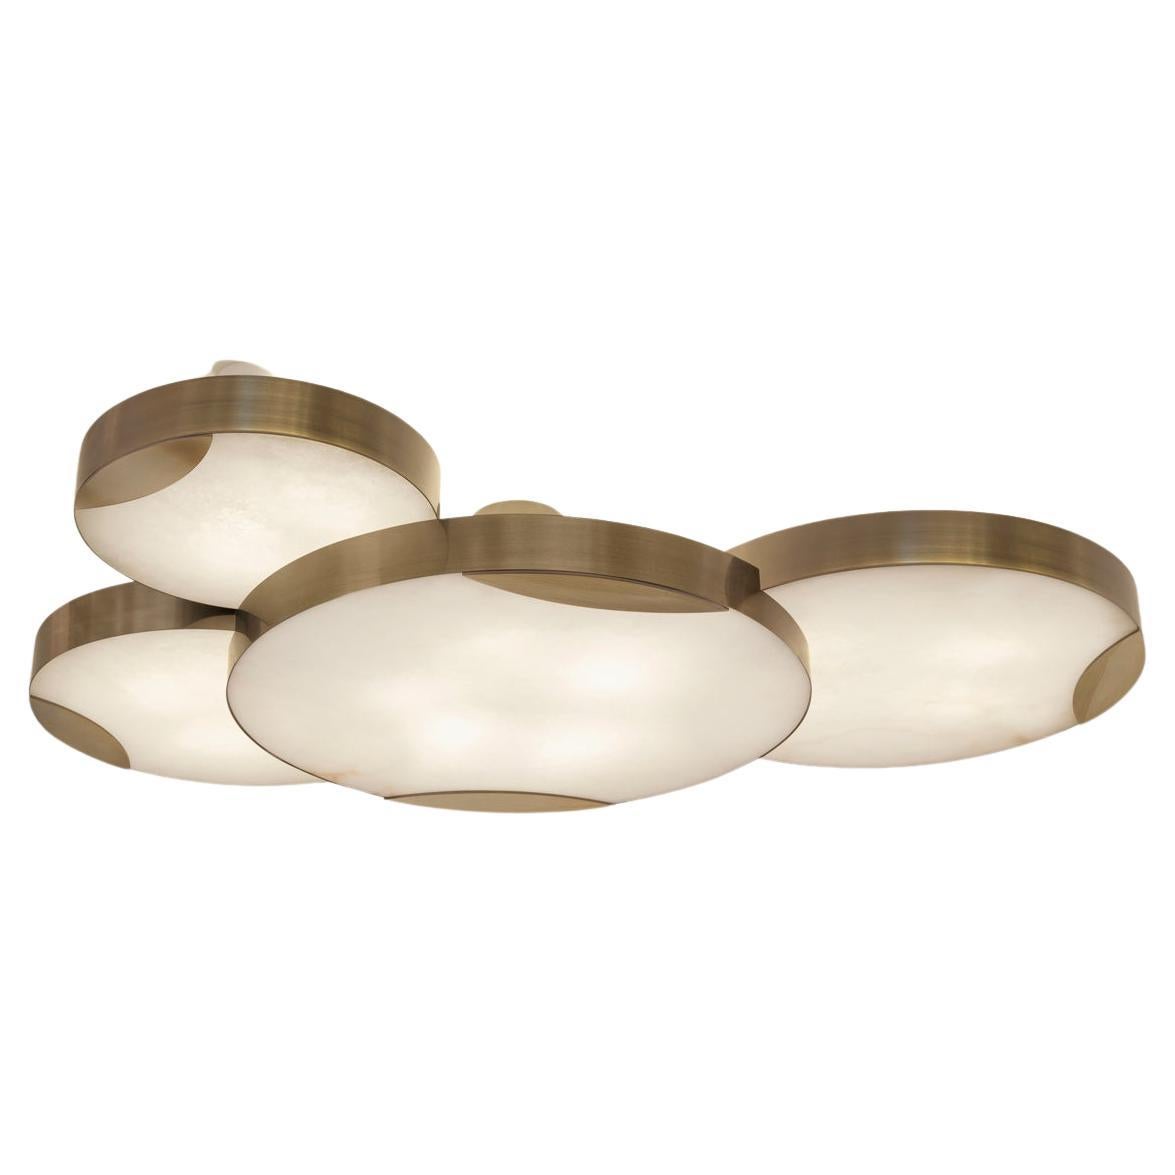 Cloud N.4 Ceiling Light by Gaspare Asaro-Bronze Finish For Sale